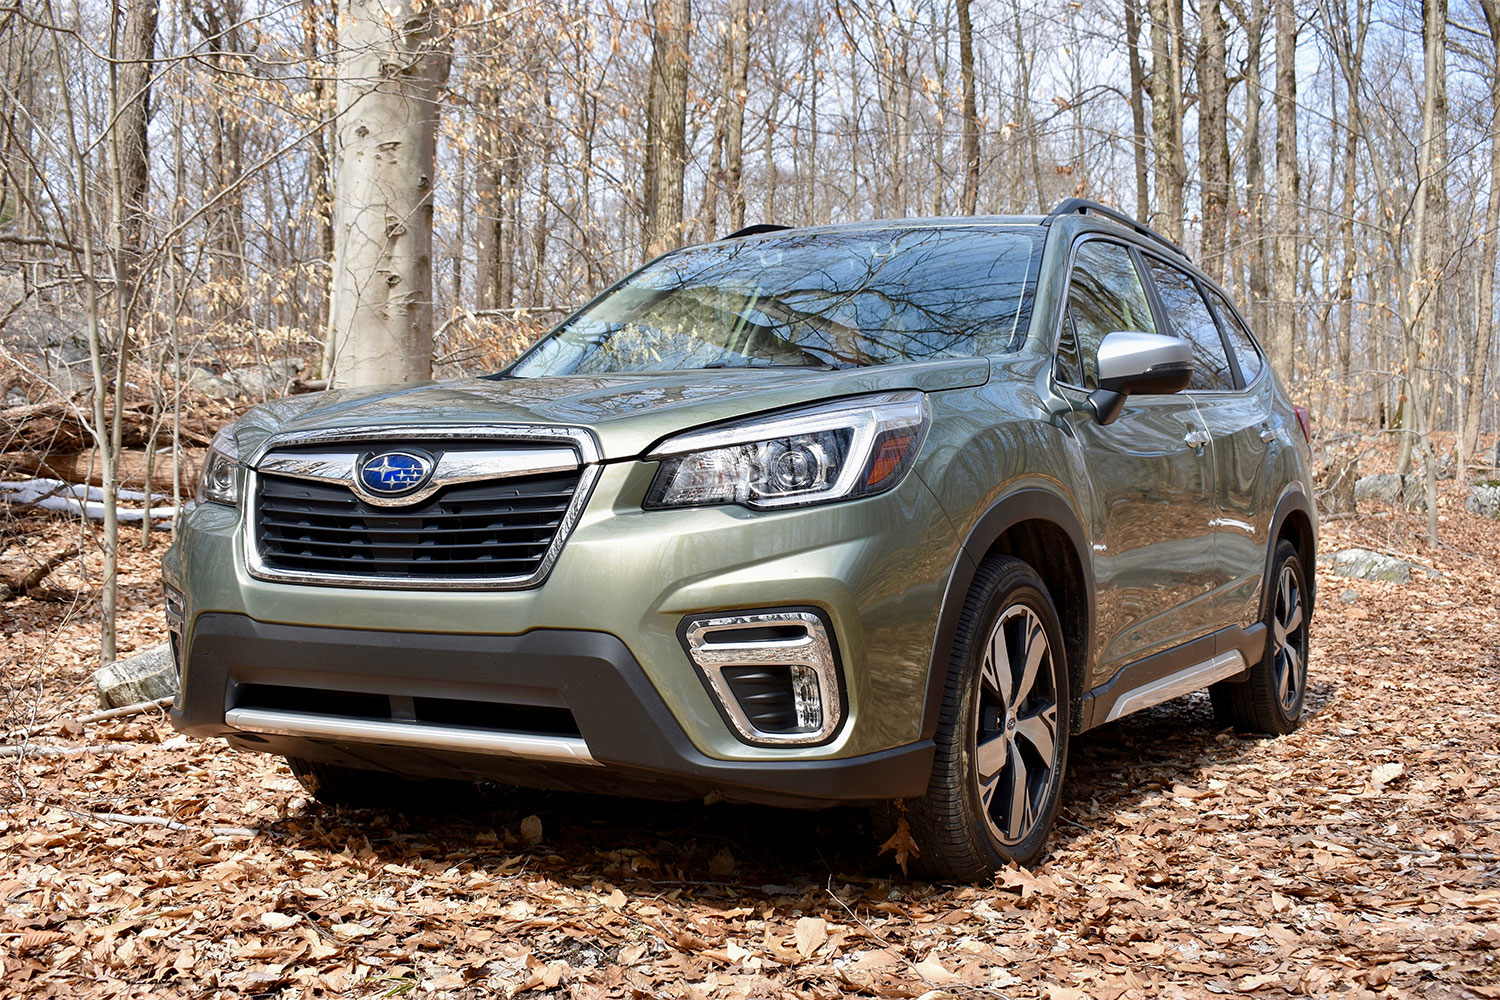 2019 Subaru Forester Touring Review: Spacious Above All Else